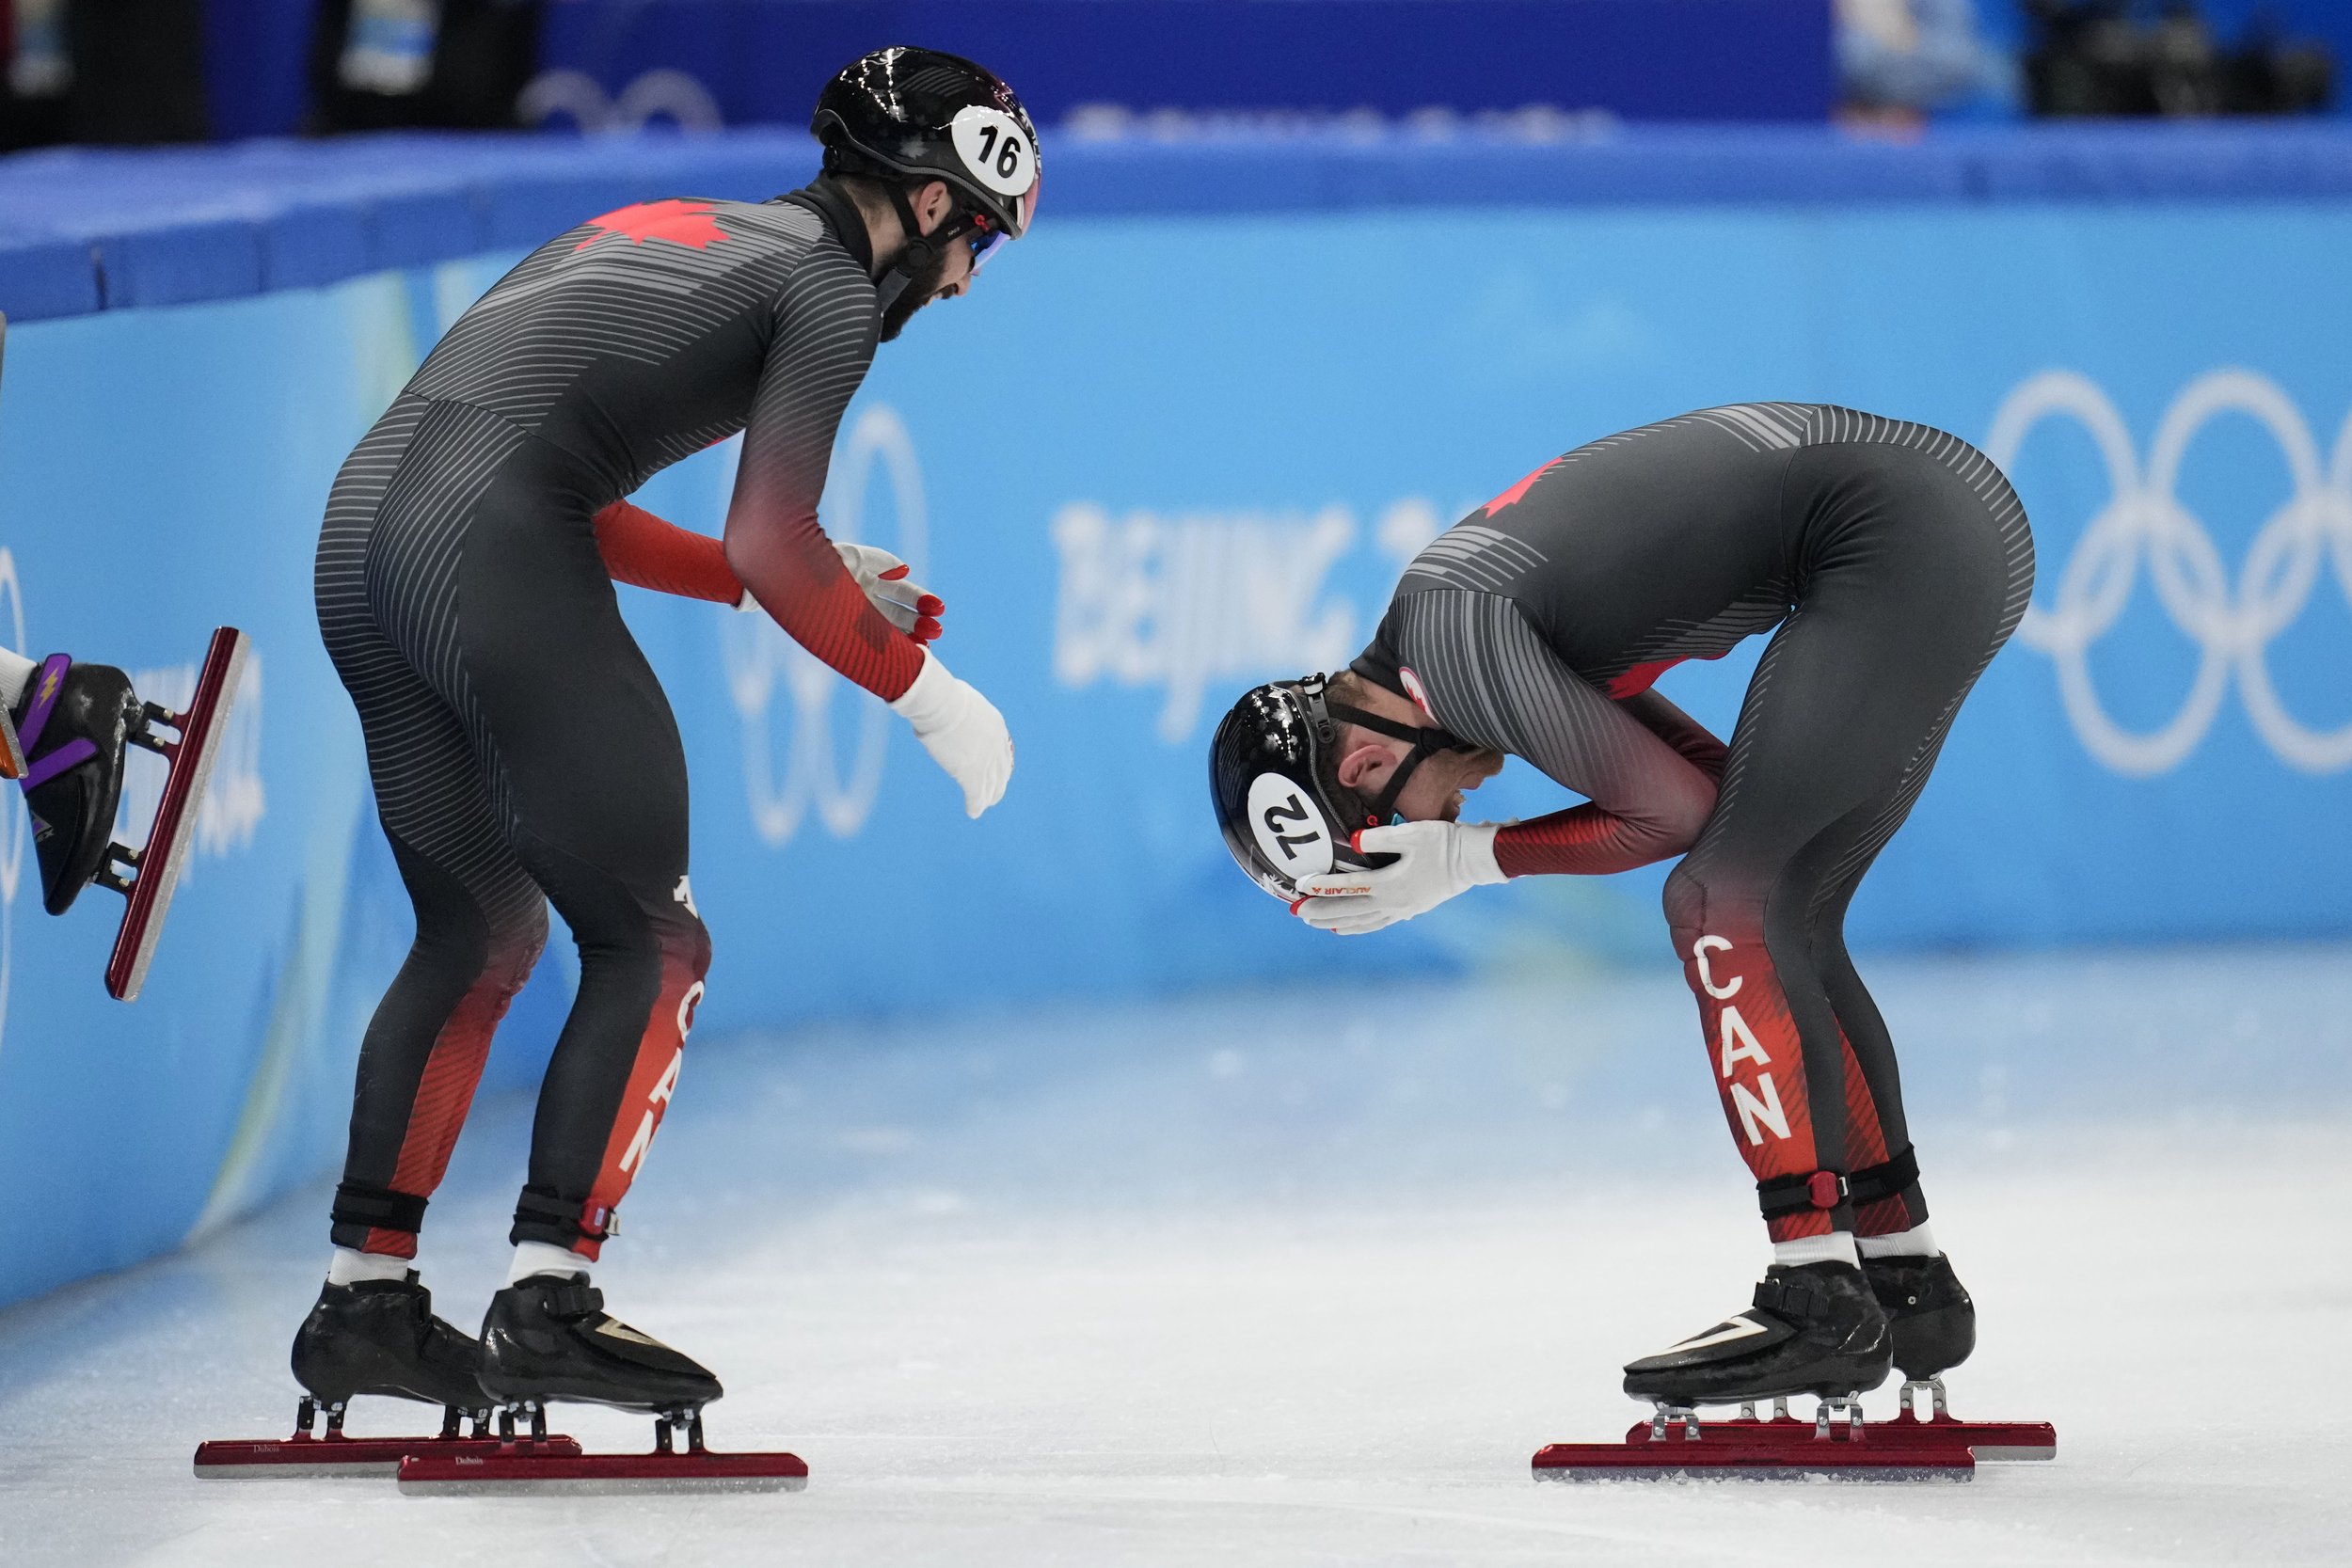  Steven Dubois, left, of team Canada, and teammate Pascal Dion celebrate after winning the men's 5000-meters relay final during the short track speedskating competition at the 2022 Winter Olympics, Wednesday, Feb. 16, 2022, in Beijing. (AP Photo/Nata